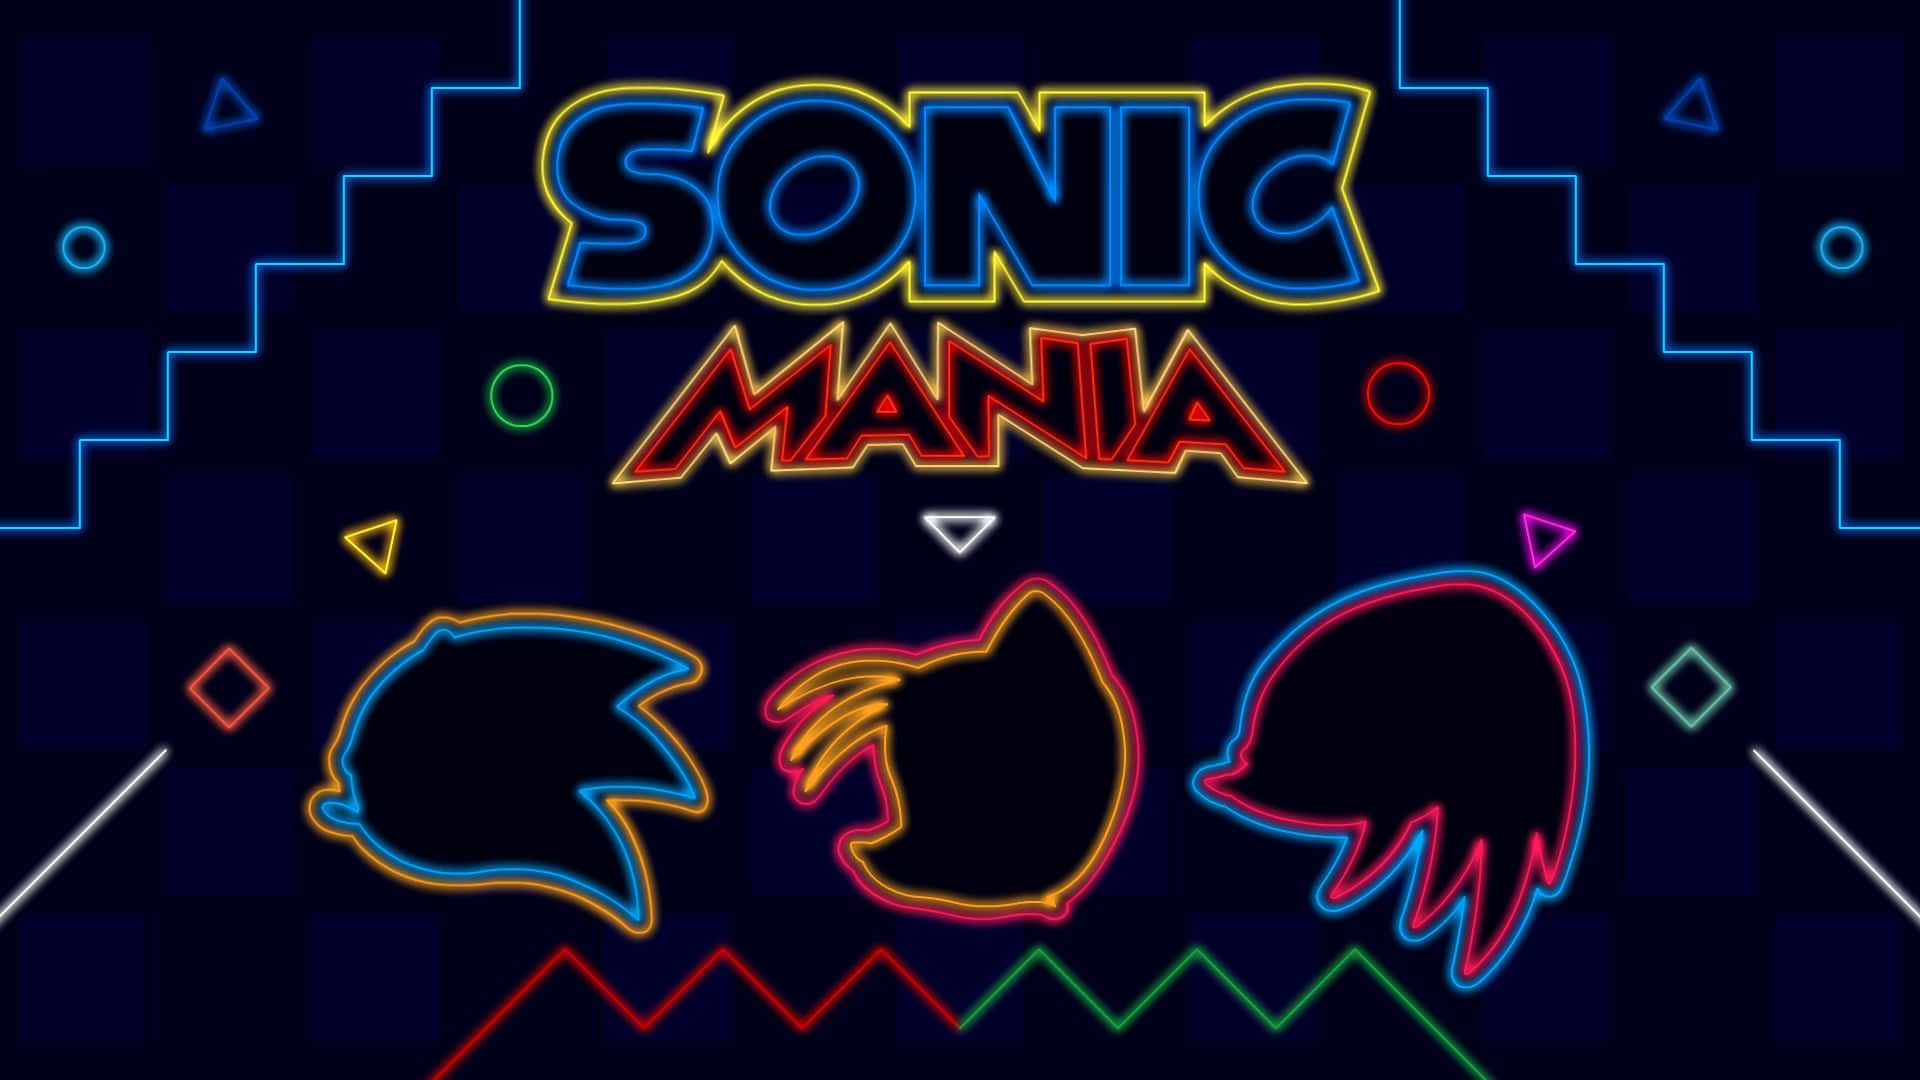 Cool Ps4 Sonic Mania With Neon Colored Design Wallpaper